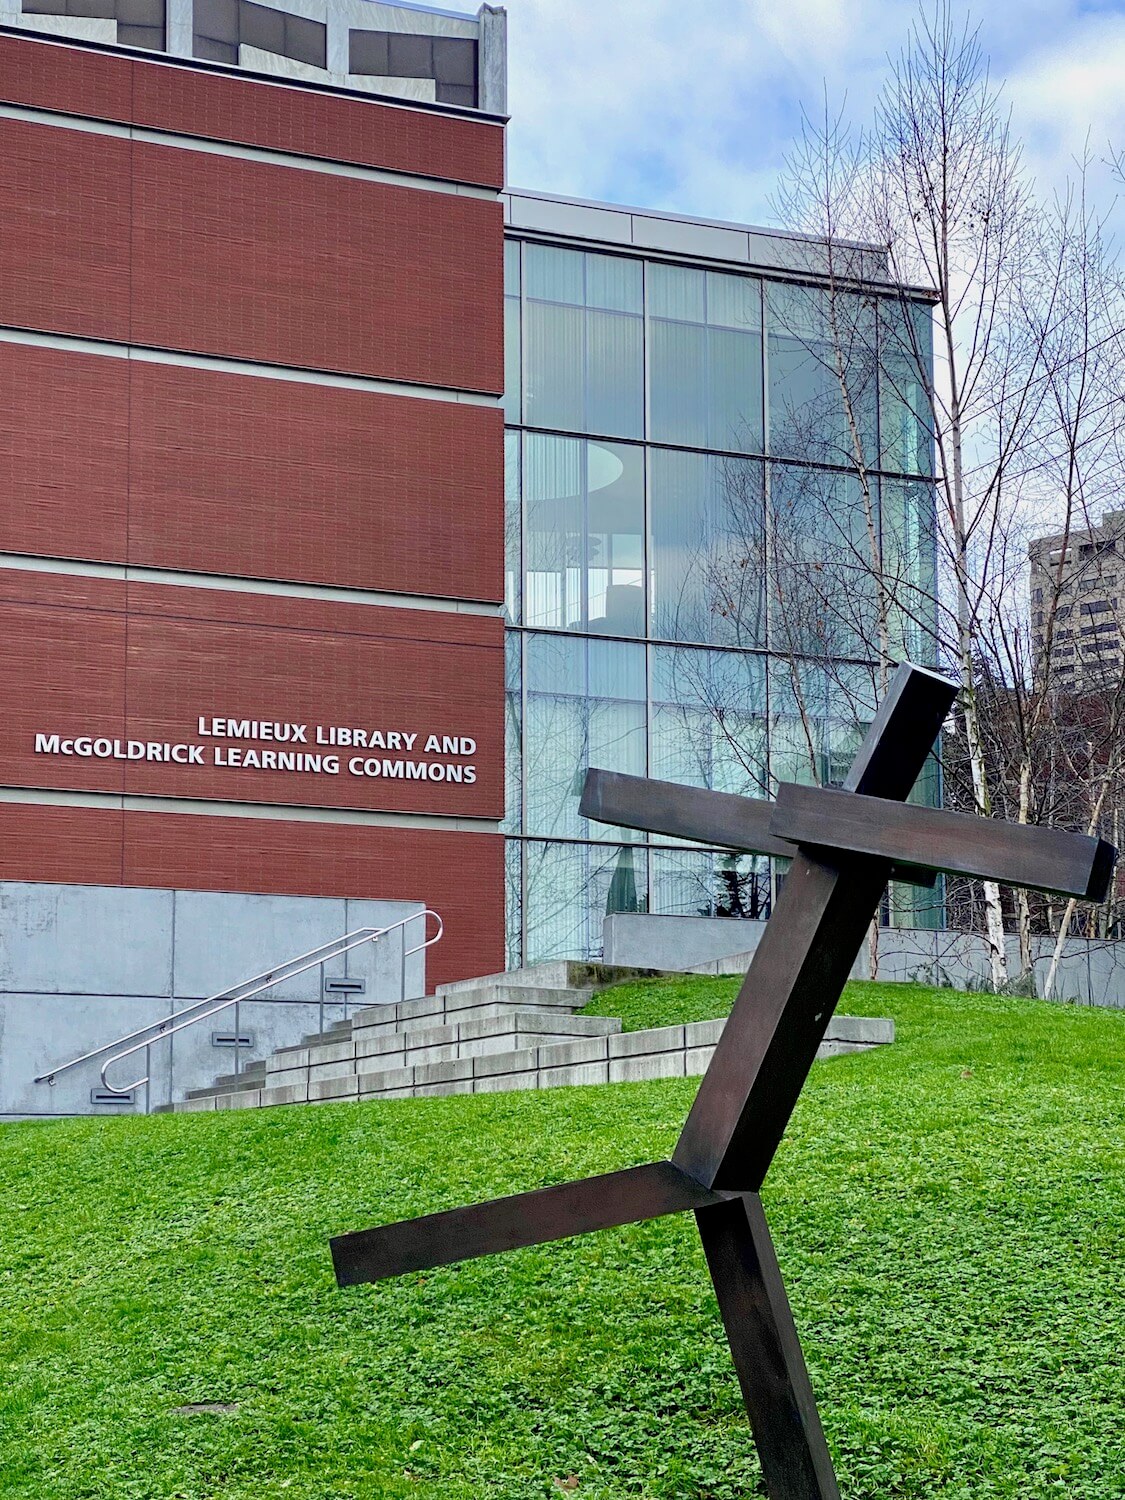 An animated rusted metal sculpture seems to frolic on the lawn in front of the library at Seattle University. 